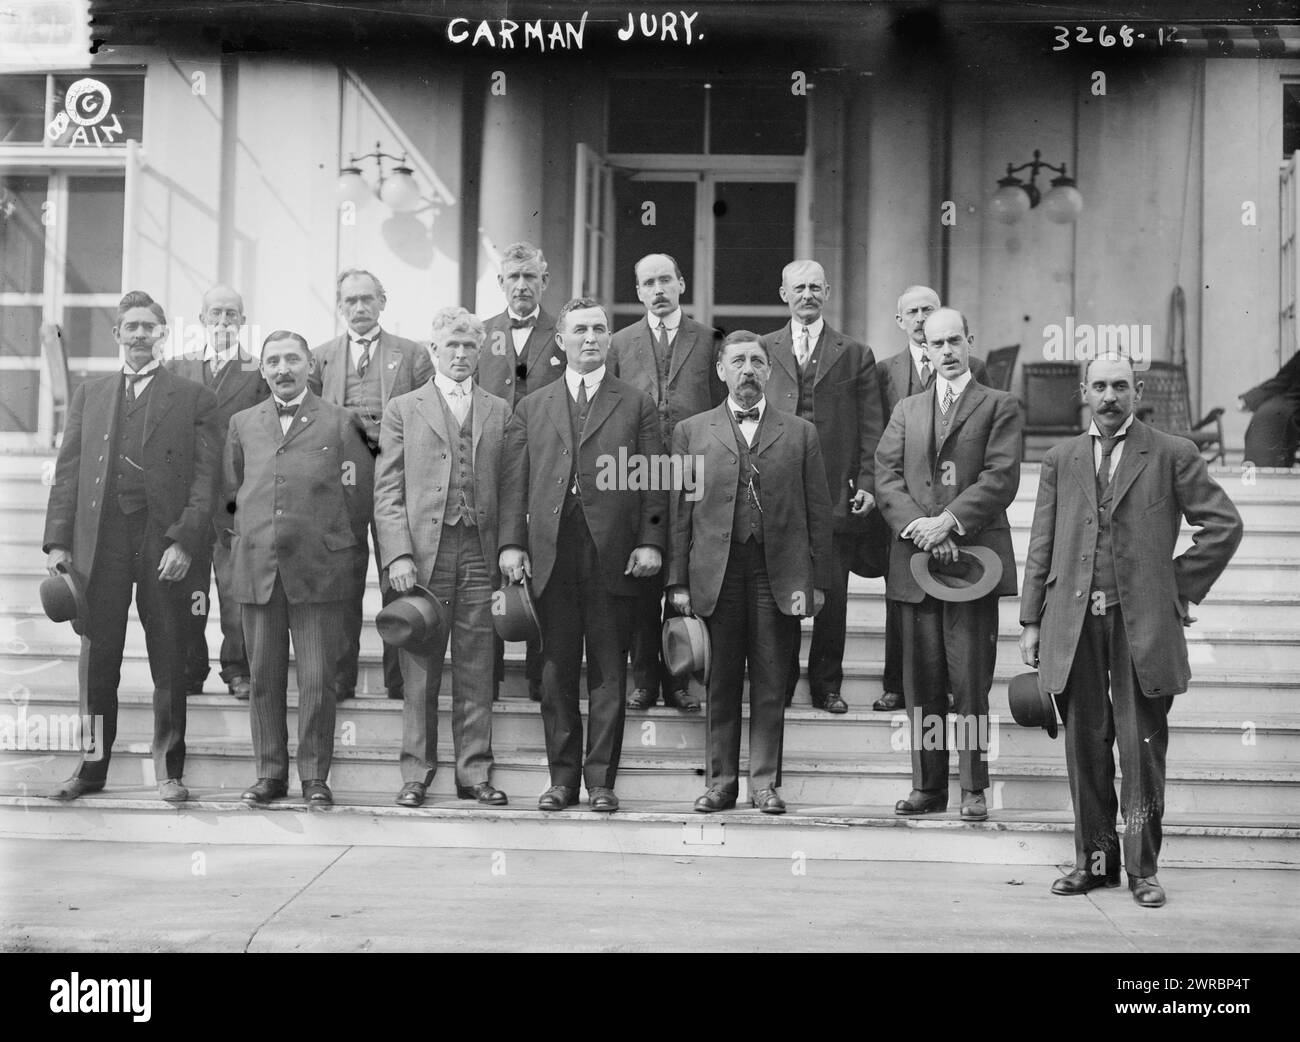 Carman jury, Photograph shows the members of the jury in the 1914 trial of Mrs. Florence Conklin Carman for the murder of Lulu Bailey. Jury included the foreman, Robert F. Ludlam, standing on the left and Alois Angler, Frank D. Mount, William G. Hovey, March Gottsch, Alvin W. Smith, James V.Giraud, Jacob Anton, John H. Molyneaux, Joseph H. Ashton, Eugene E. Carpenter and Charles D. Stryker. Trial was held at the Old Nassau Courthouse, Mineola, Long Island, New York., 1914, Glass negatives, 1 negative: glass Stock Photo